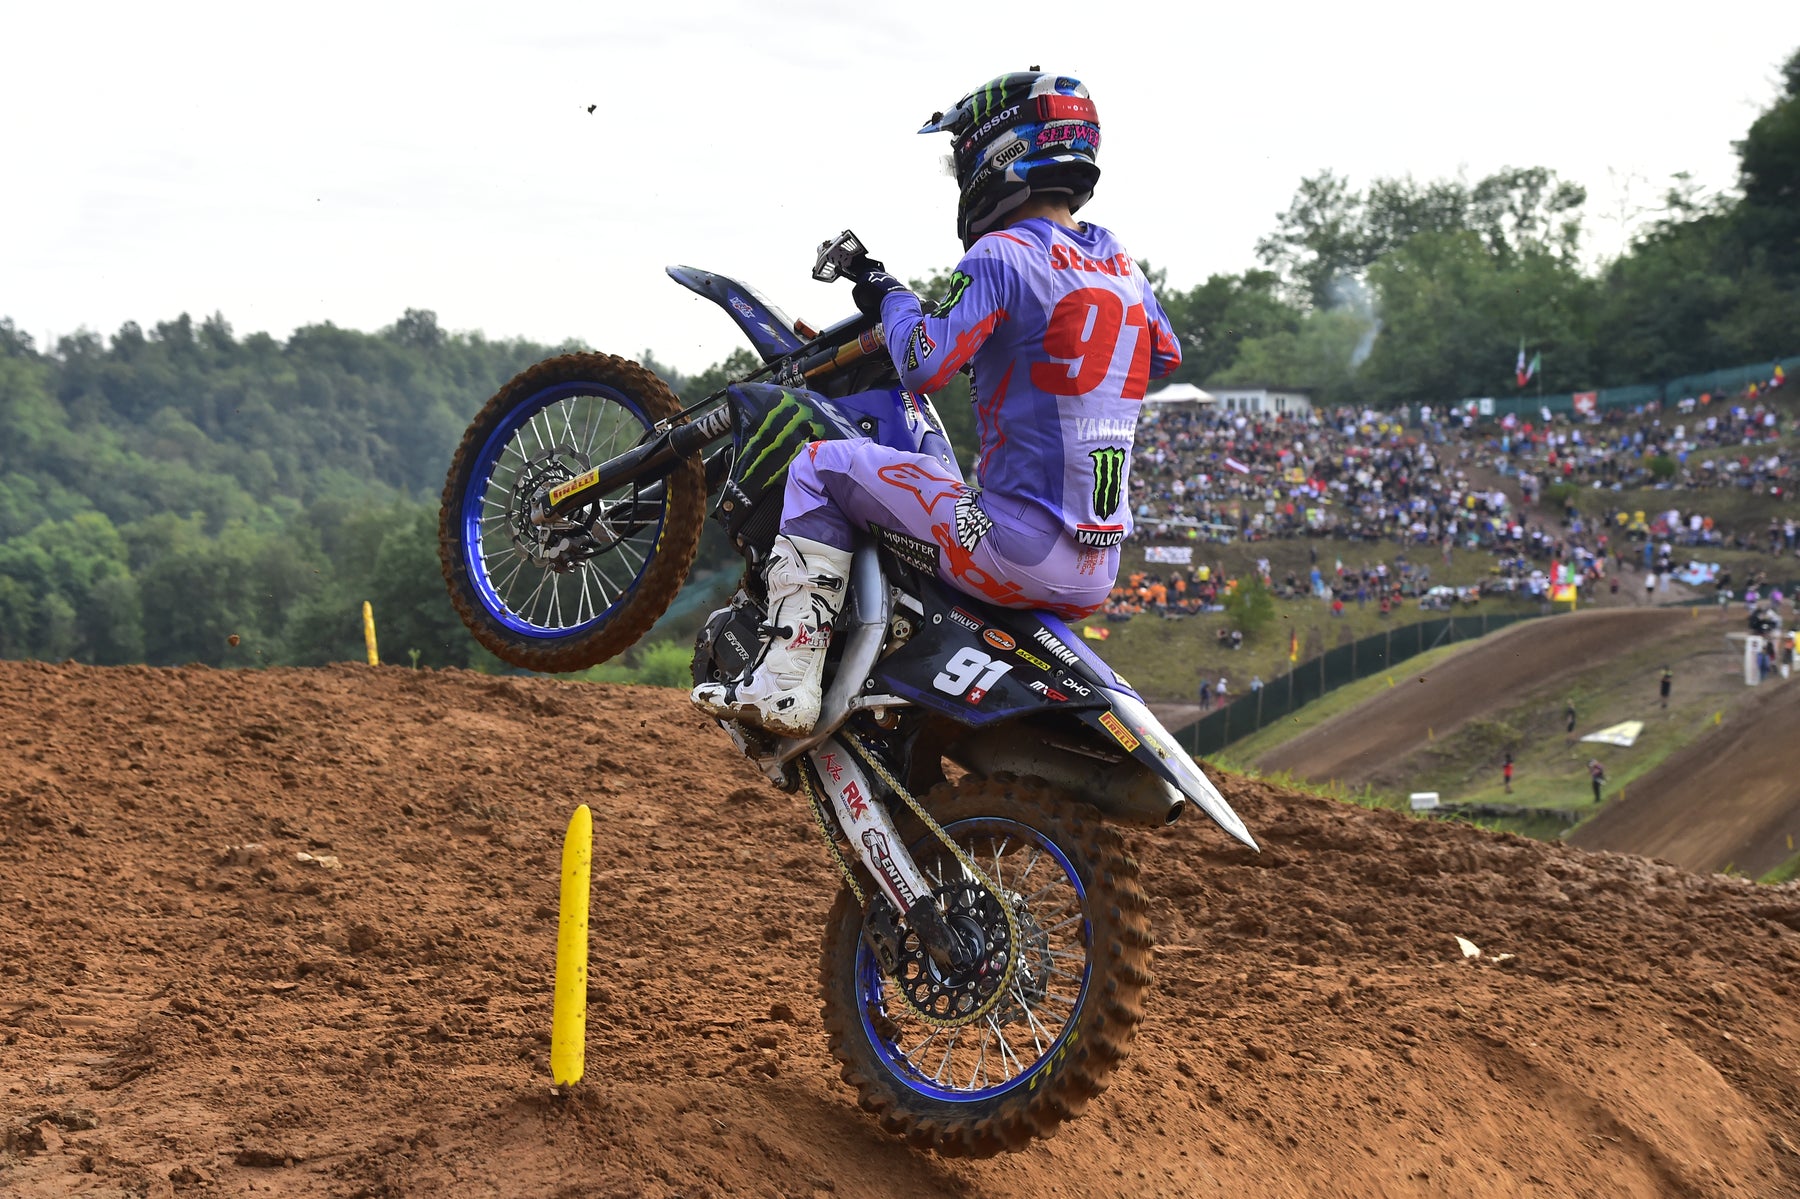 JEREMY SEEWER DELIVERS RACING MASTERCLASS TO WIN MXGP OF ITALY AT MAGGIORA